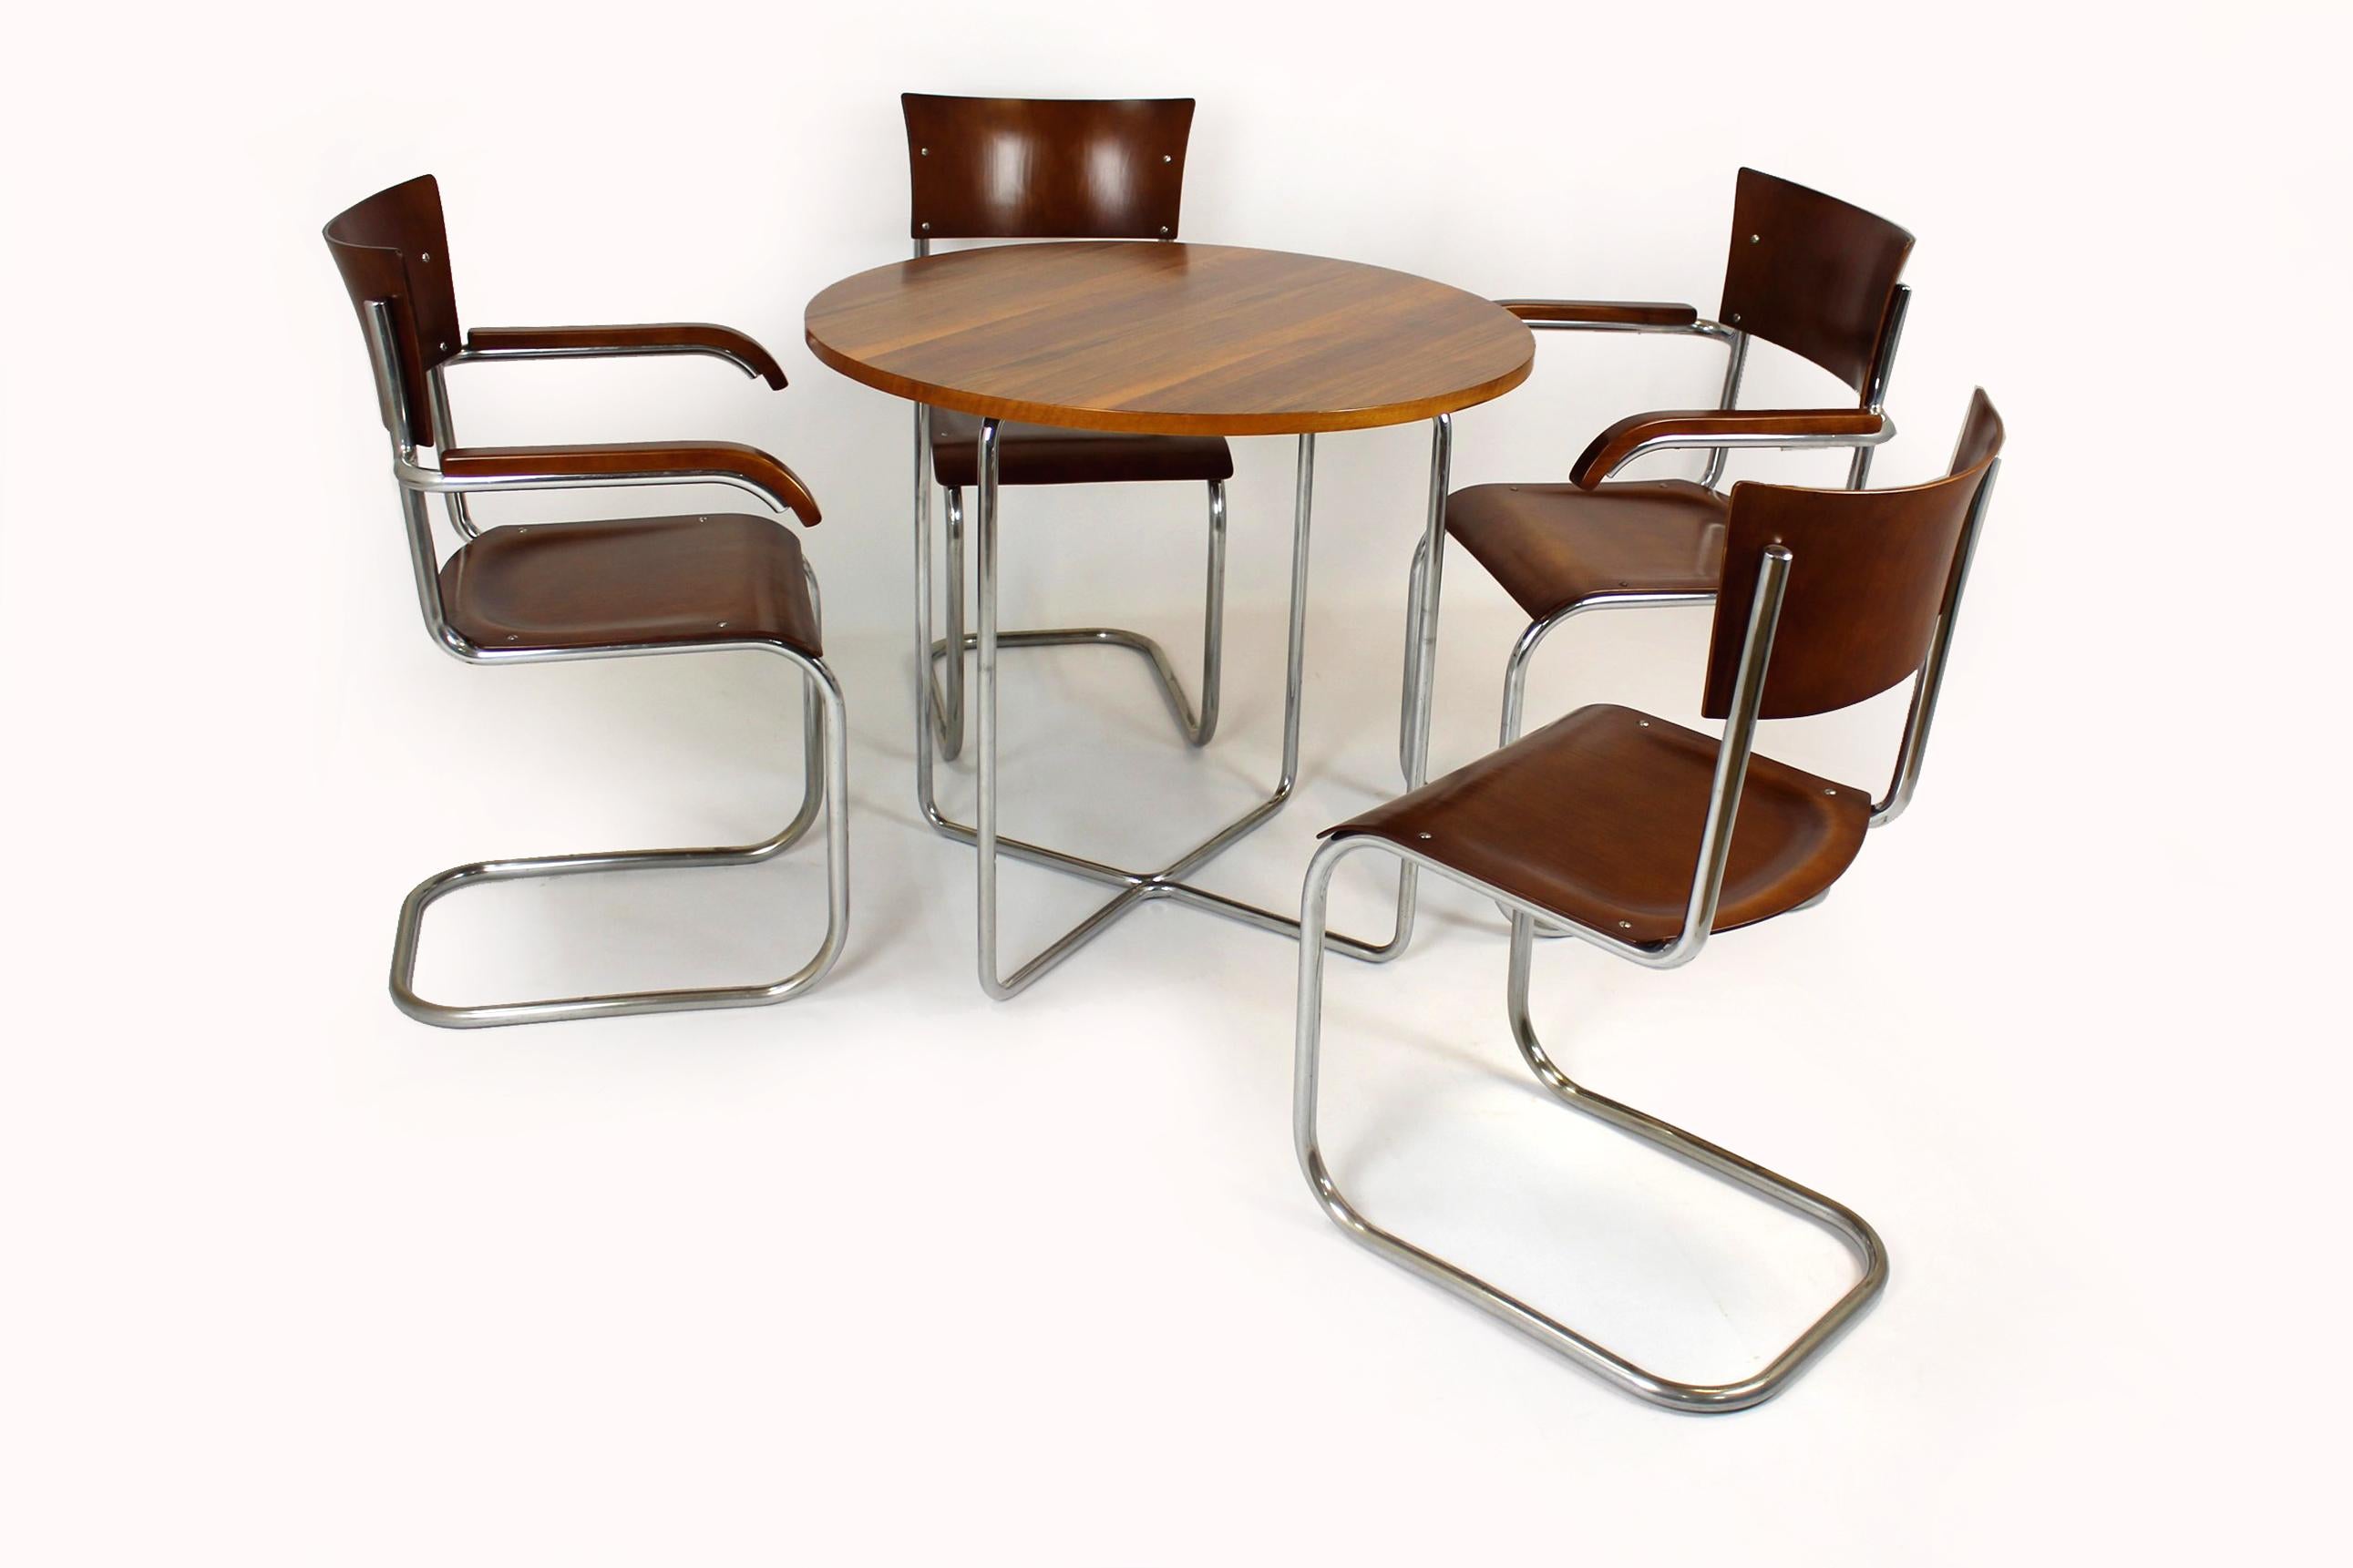 Restored Bauhaus Tubular Steel Set, Round Table and Four Chairs by Mart Stam, 19 For Sale 4